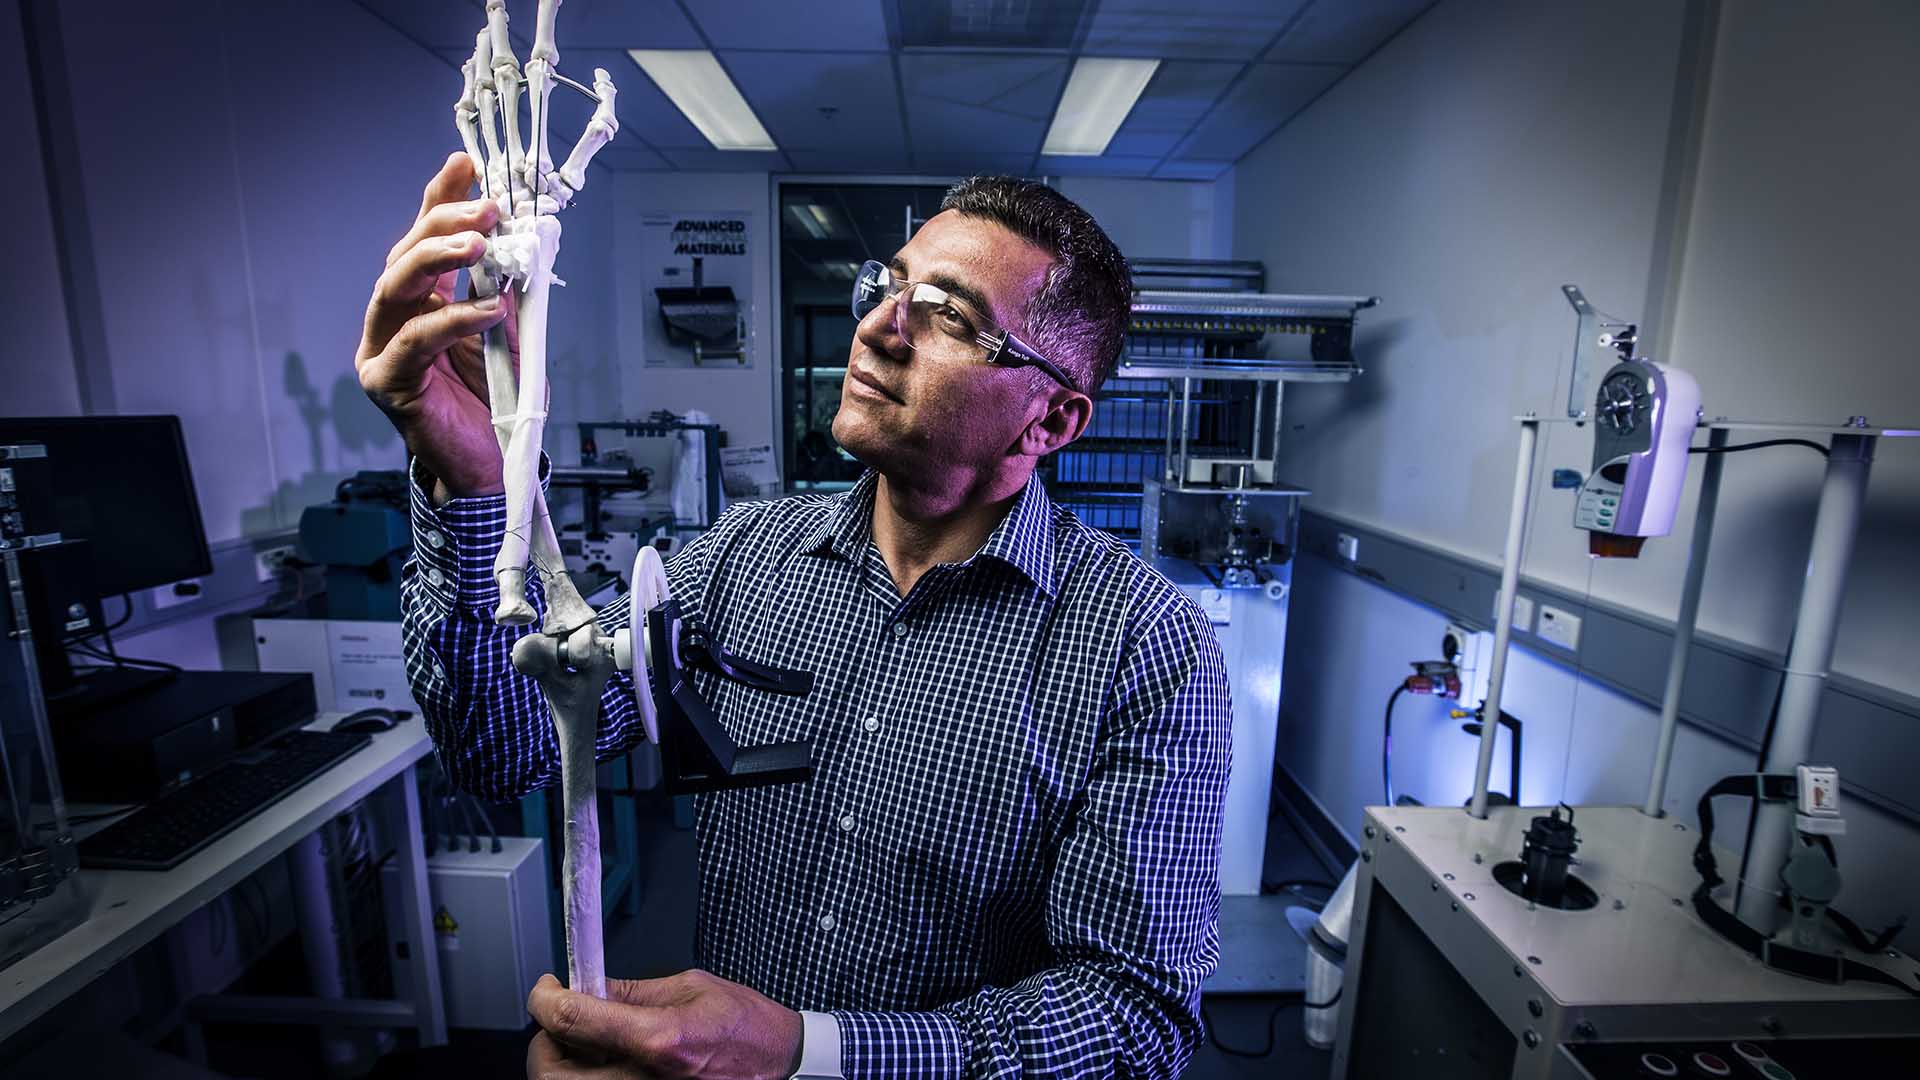 Muscle up: Research breakthrough expands potential applications for artificial muscles